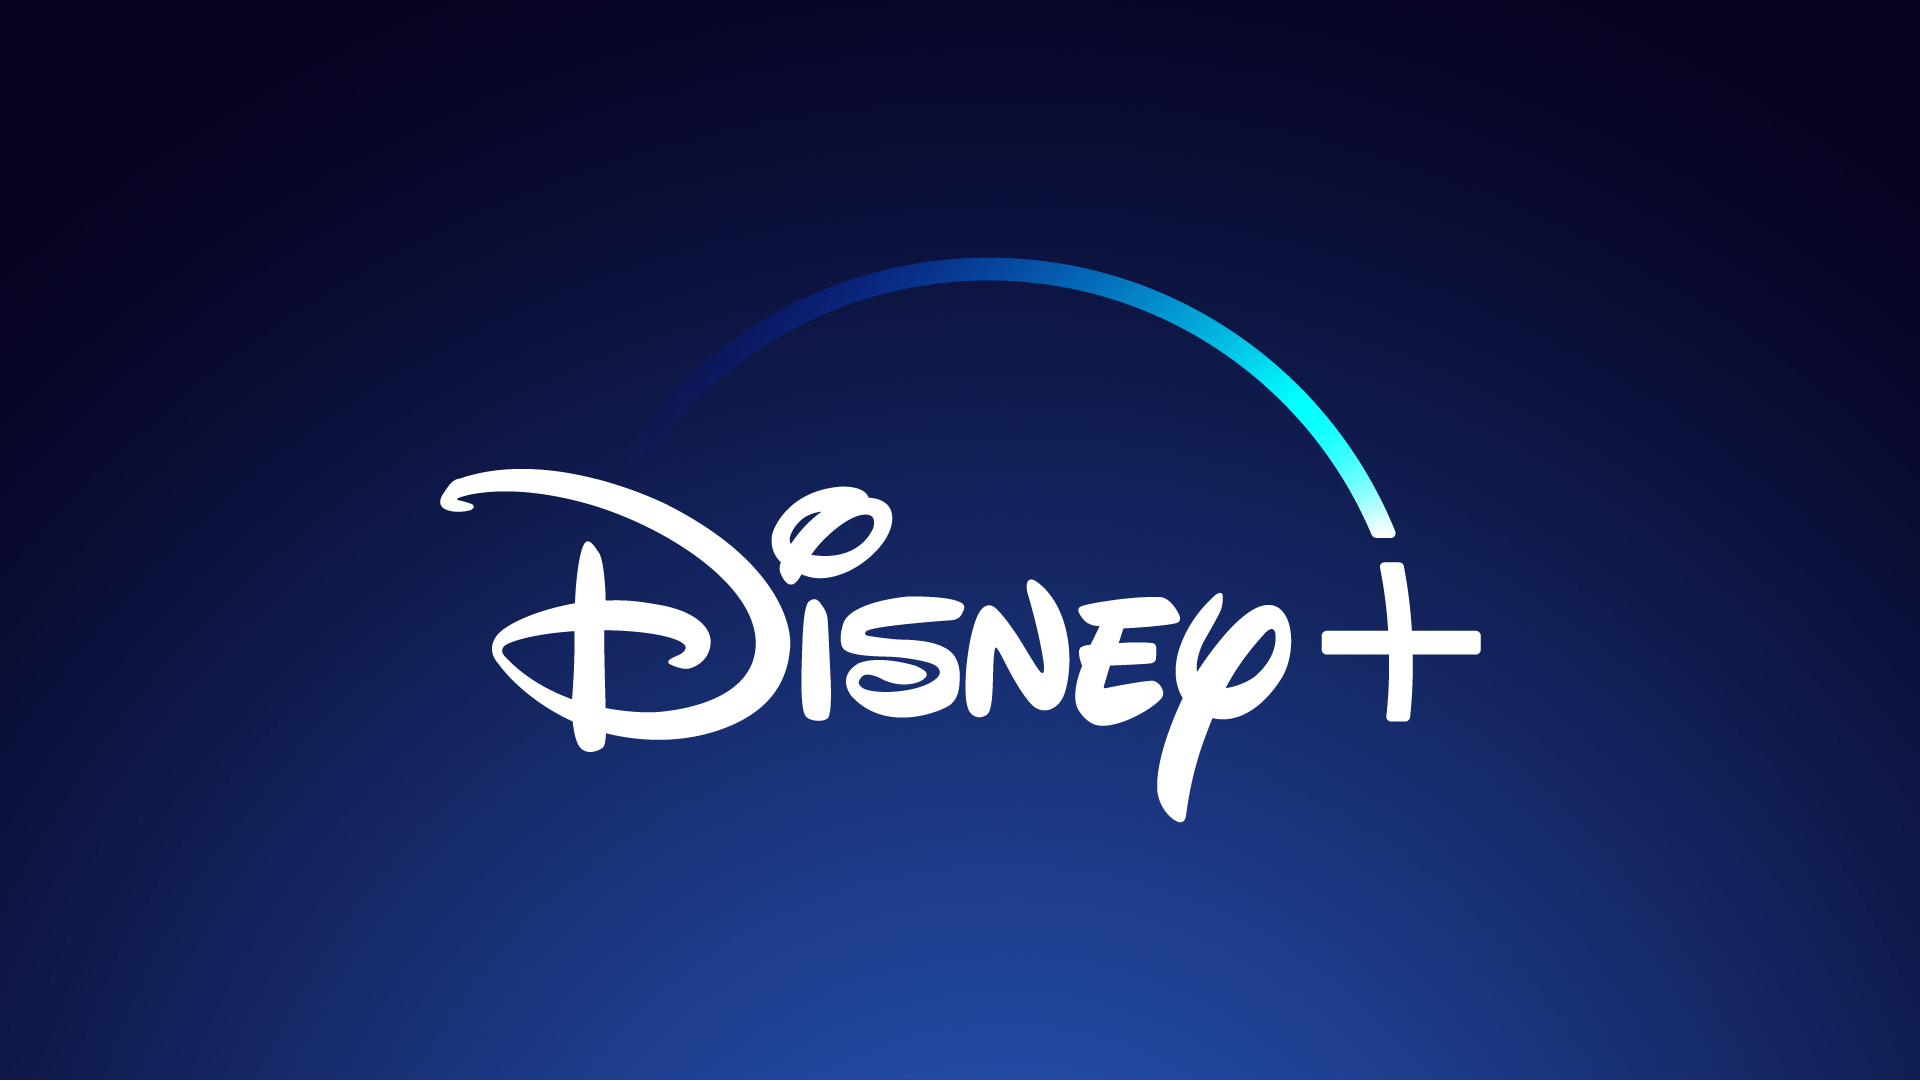 Disney+ Launch Titles Unveiled on Twitter